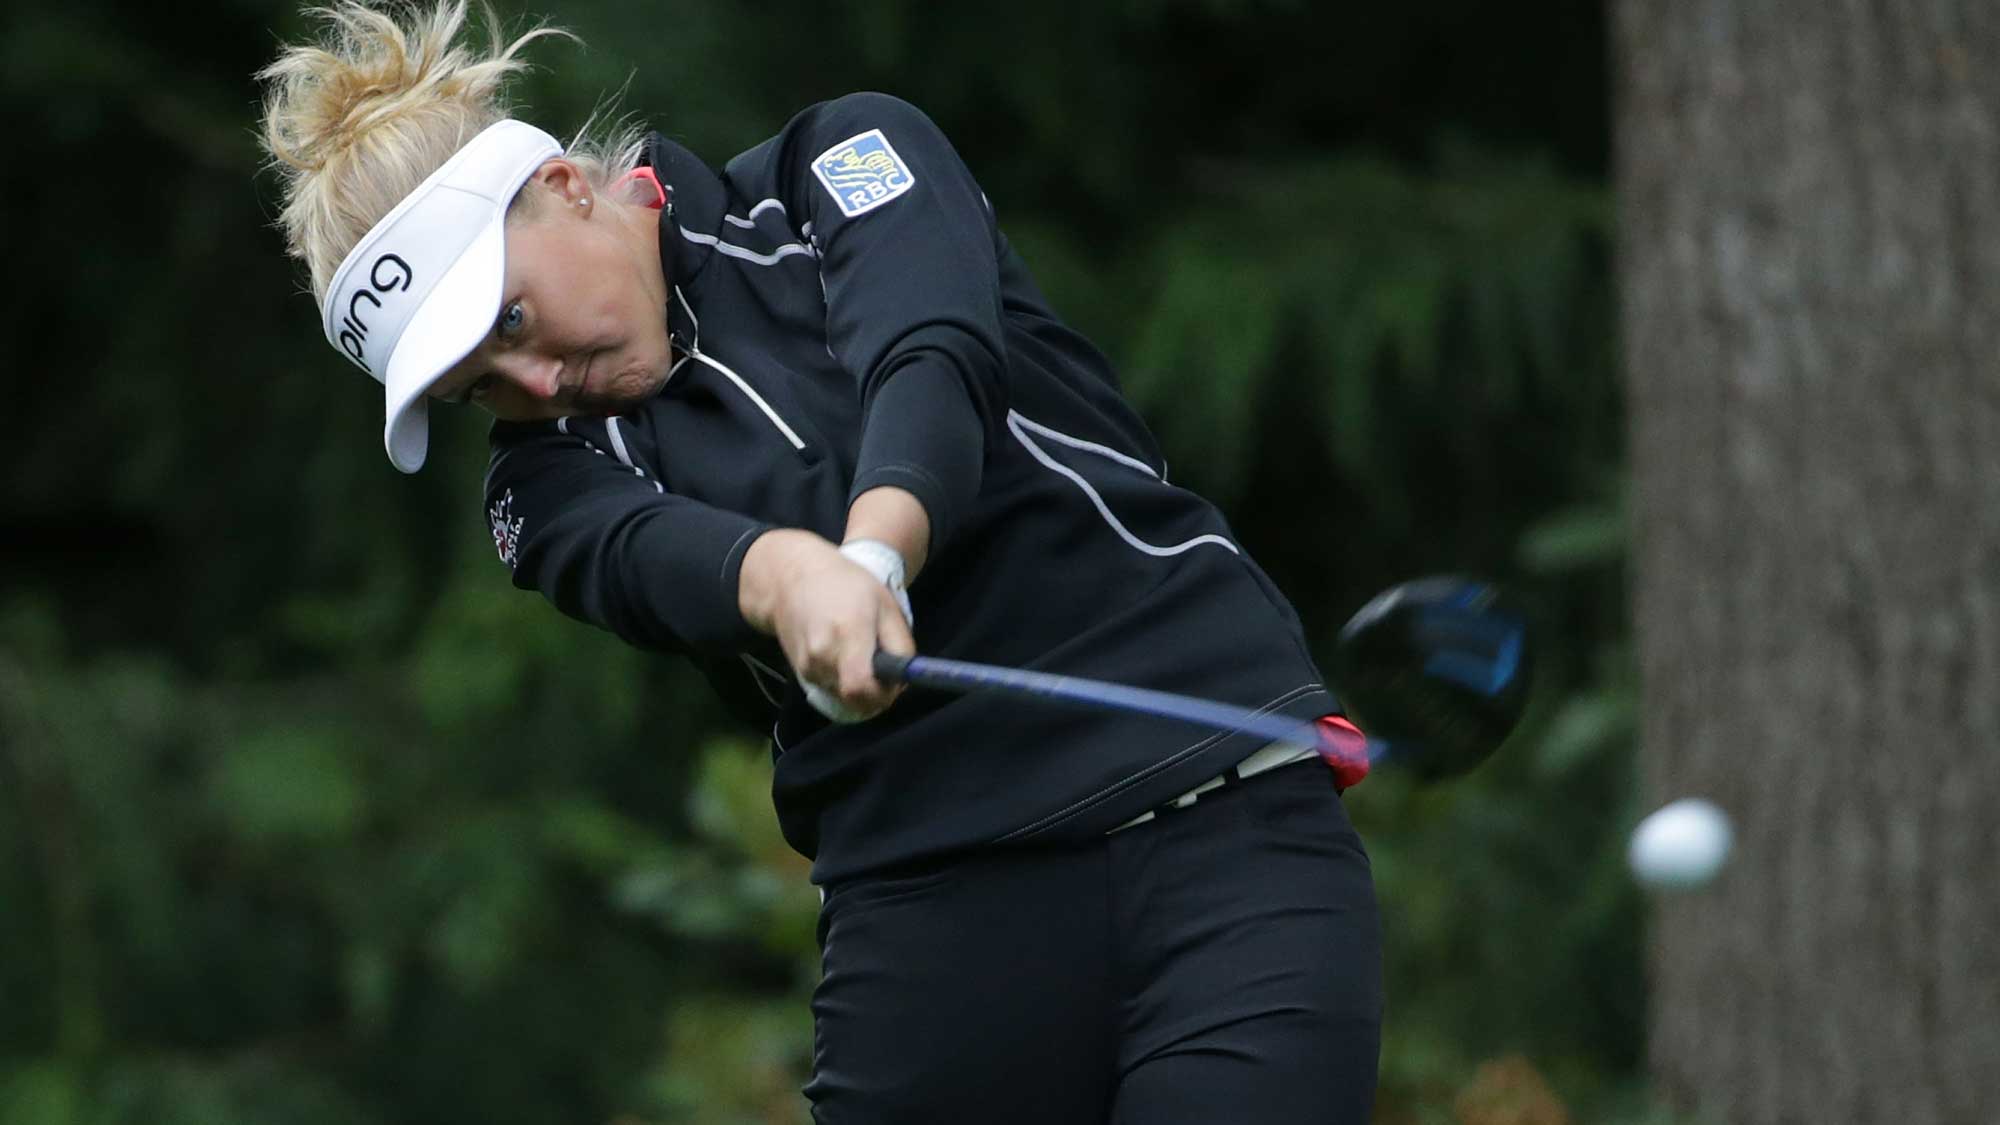 Brooke Henderson of Canada hits a tee shot on the fourth hole during the third round of the KPMG Women's PGA Championship